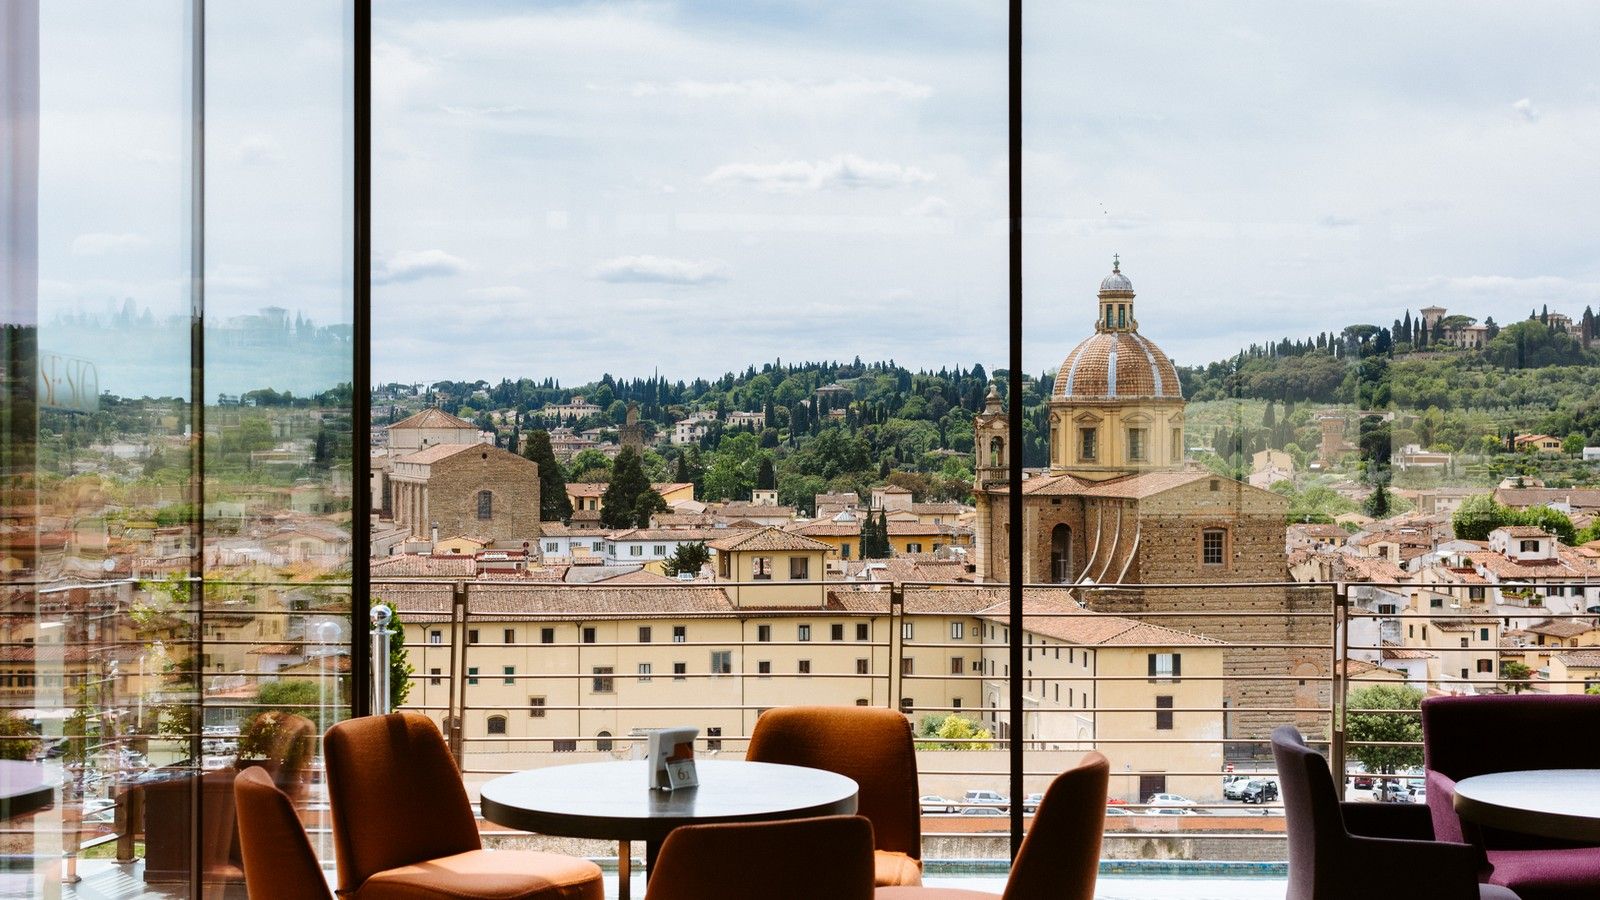 A glimpse of the view from SE·STO on Arno, Westin Excelsior